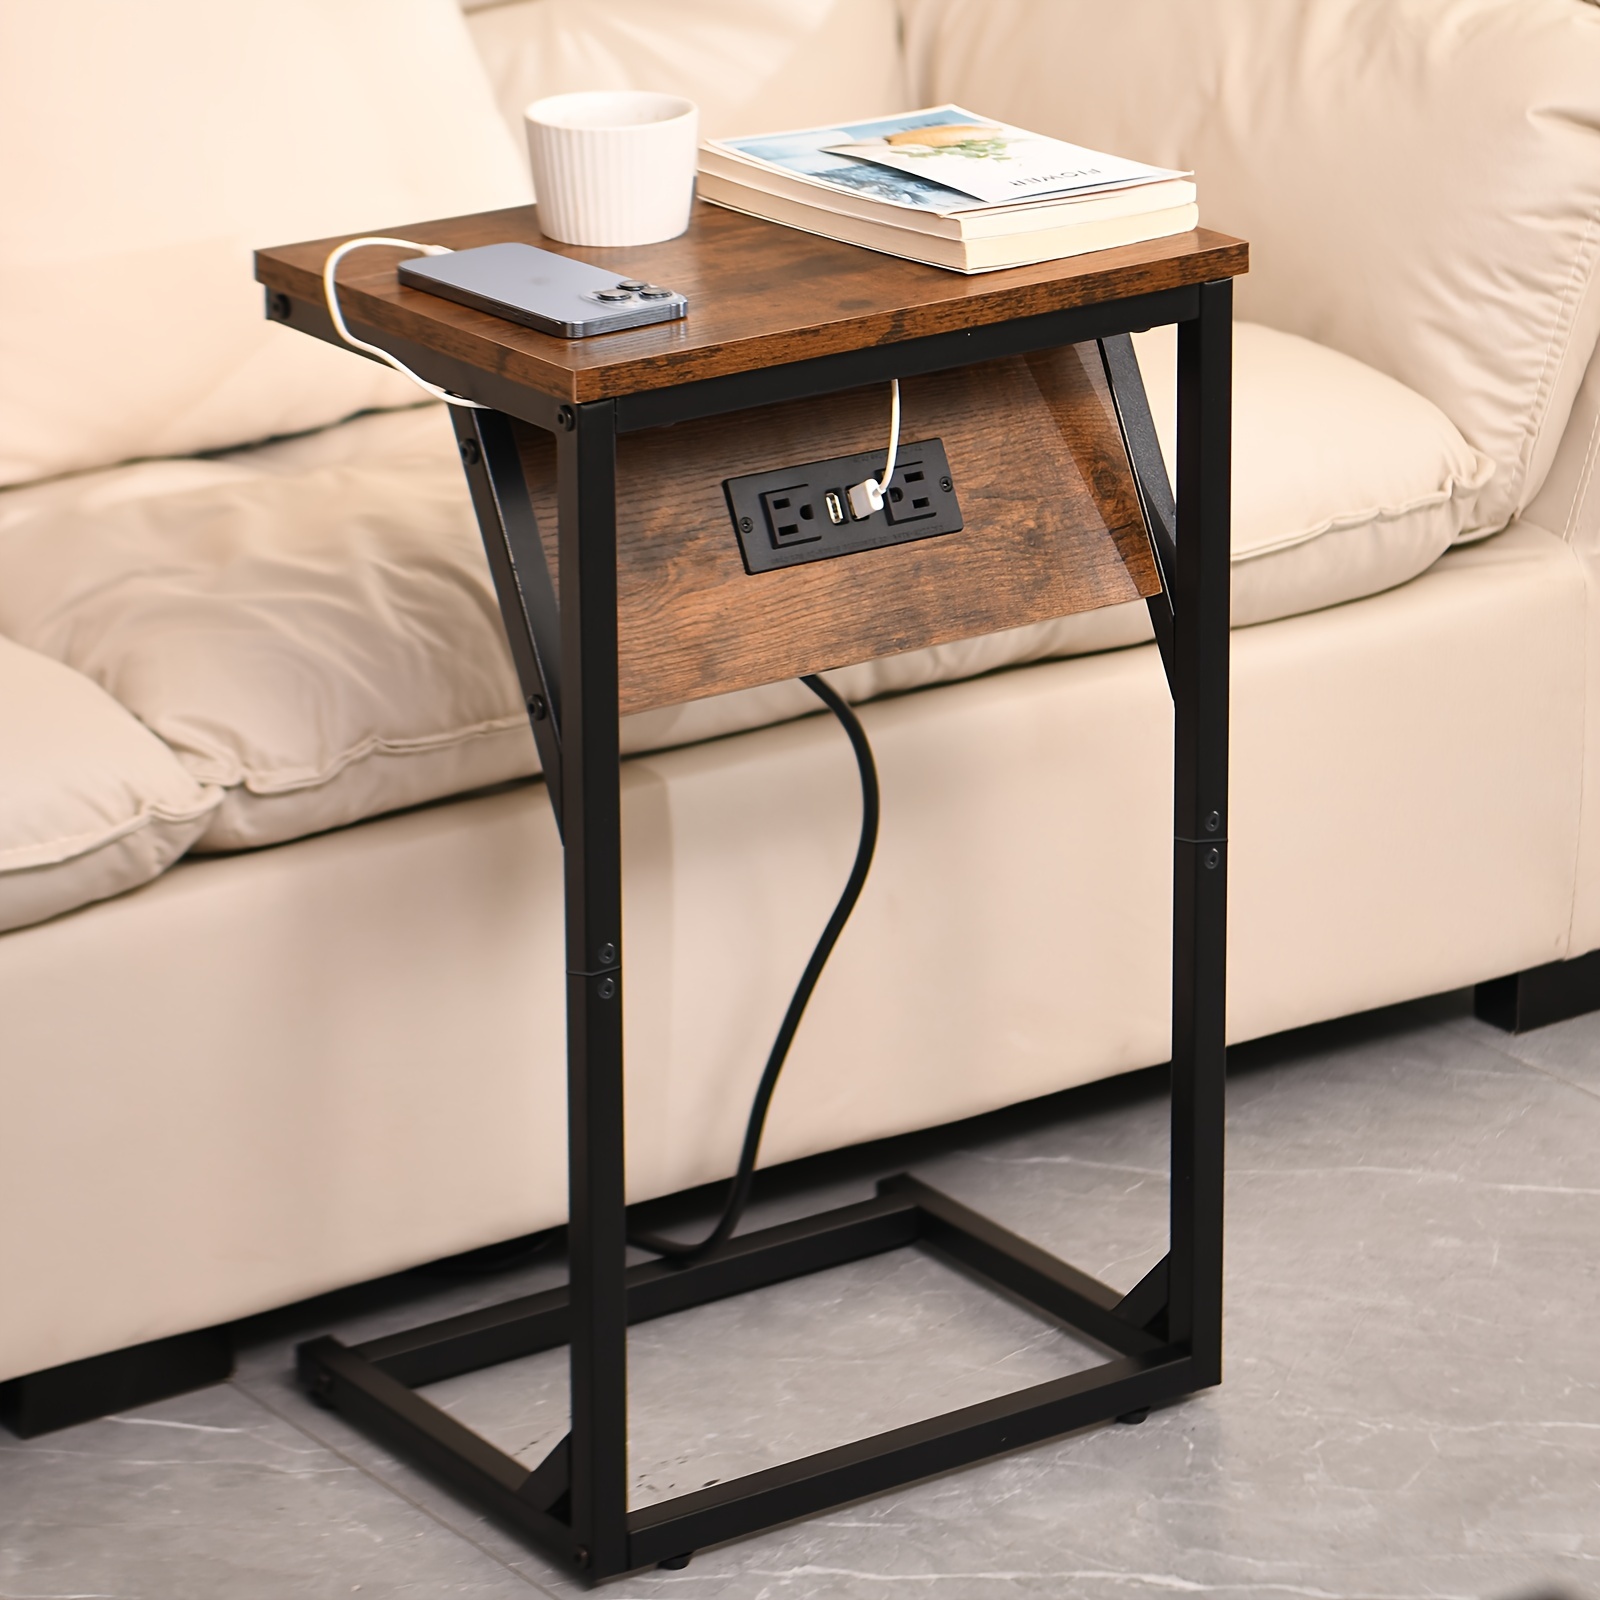 

C-shaped Side Table End Table With Charging Station, 2usb Ports And 2power Outlets, Steel Metal Frame, Side Table, Nightstands For Living Room, Bed Room, Narrow Space, Brown